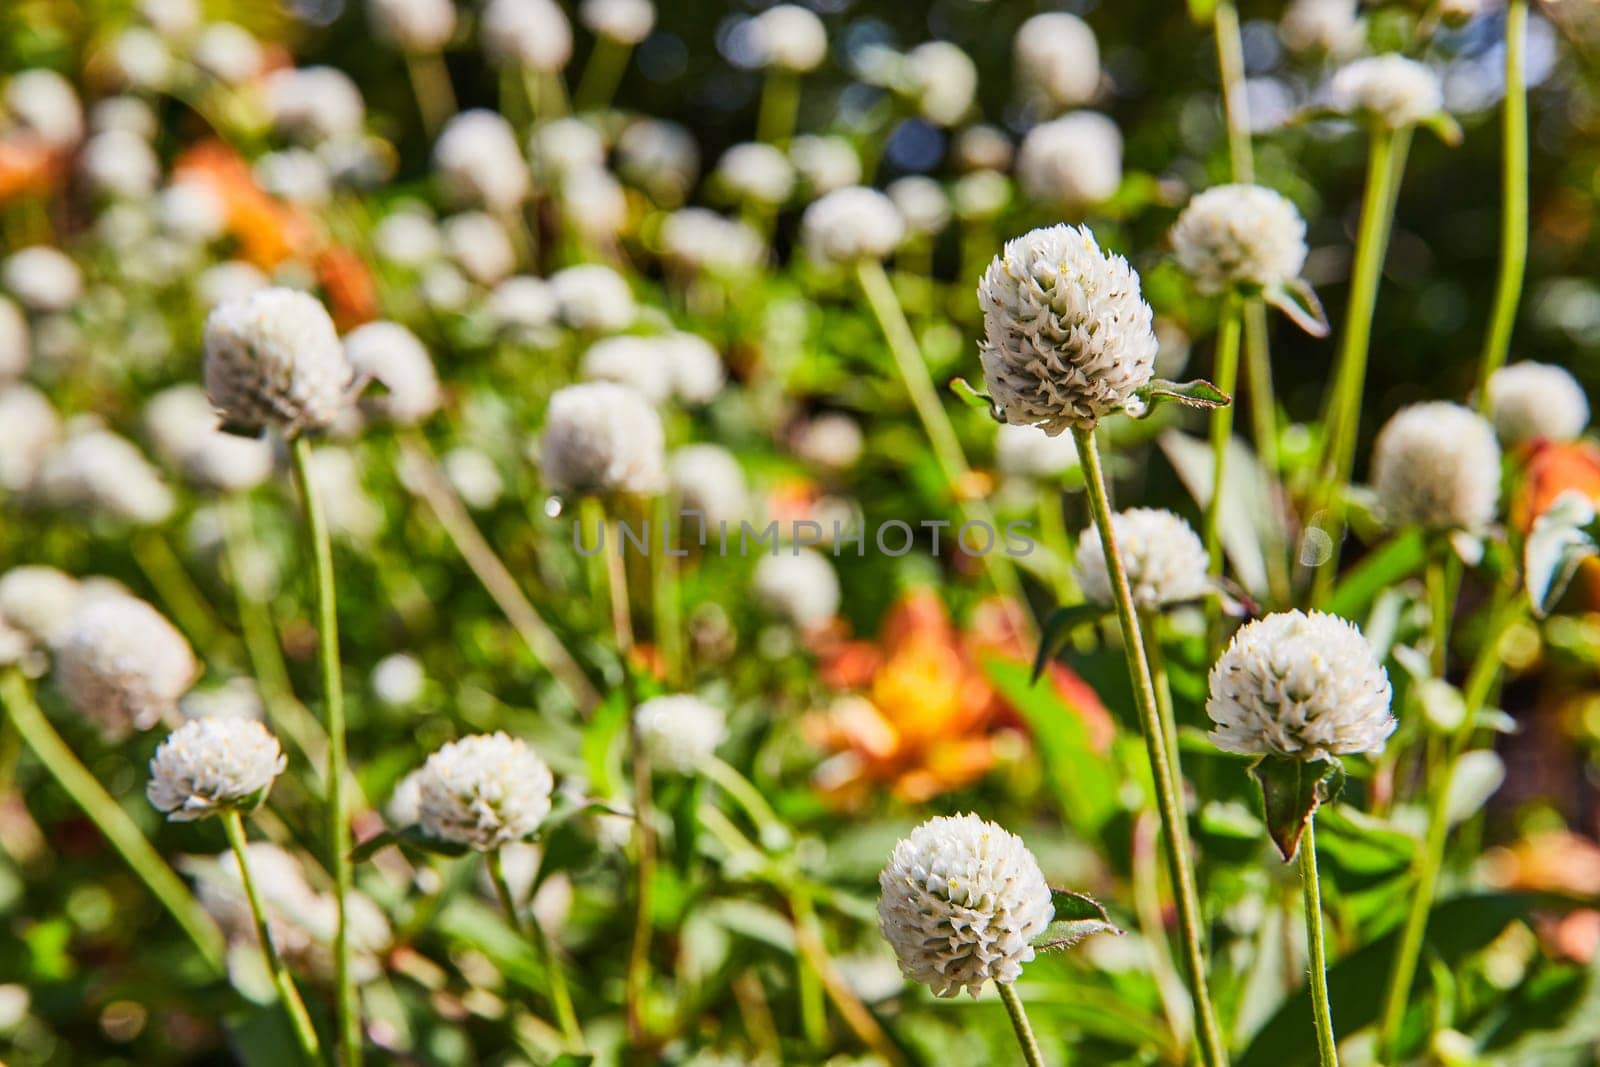 White Clover Blossoms in Lush Garden, Bright Daylight Perspective by njproductions